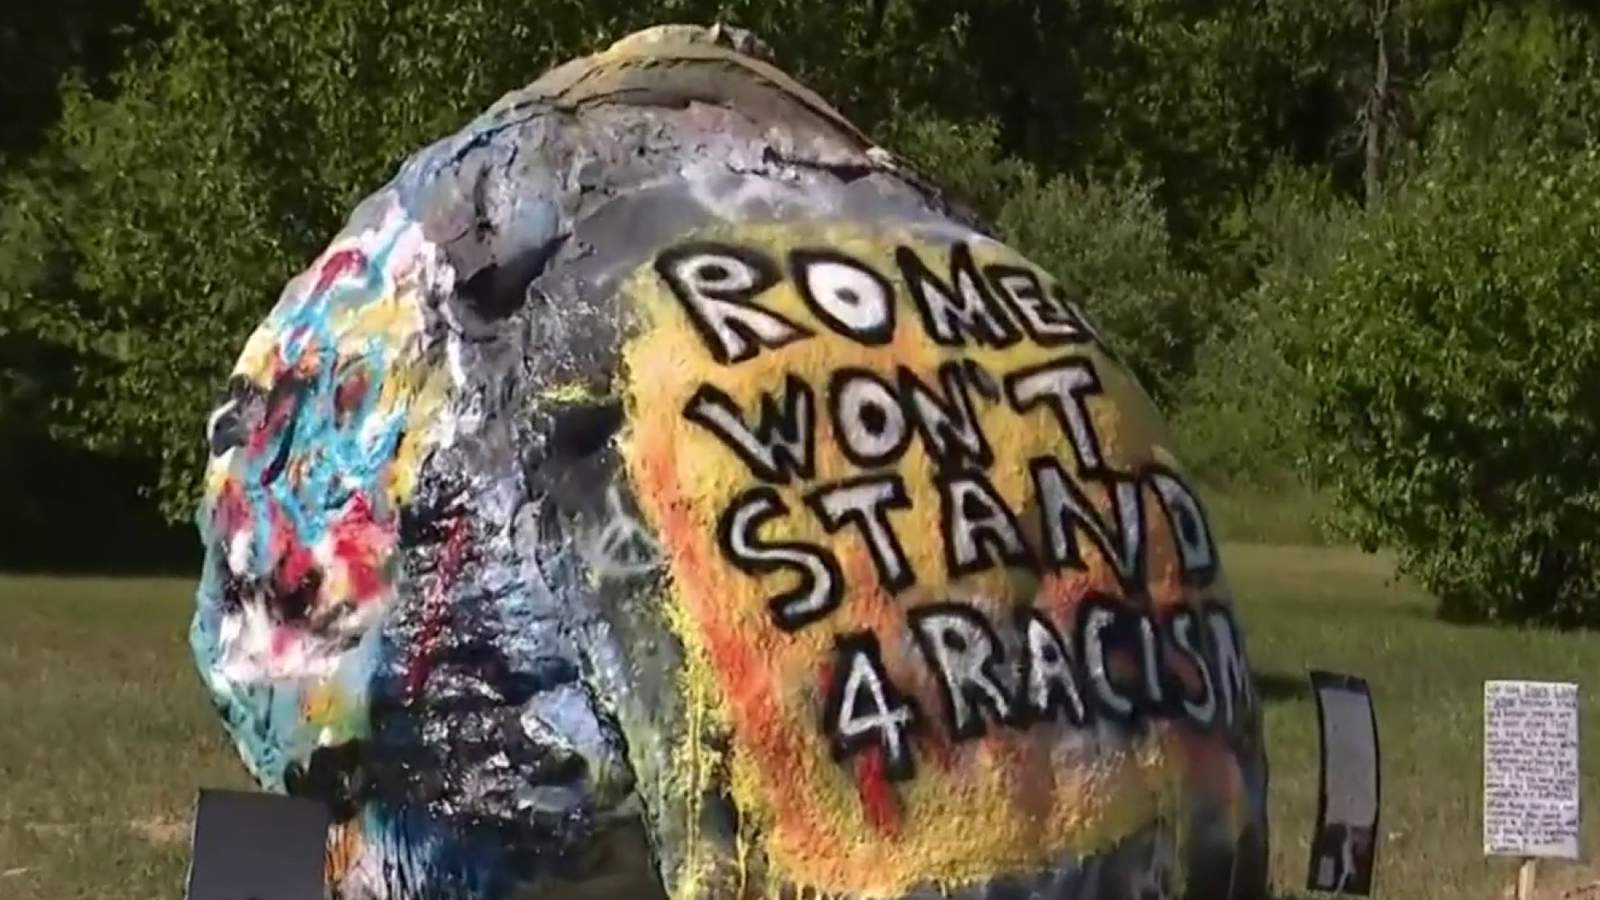 Romeo community comes together to promote peace after racial slurs painted on iconic rock